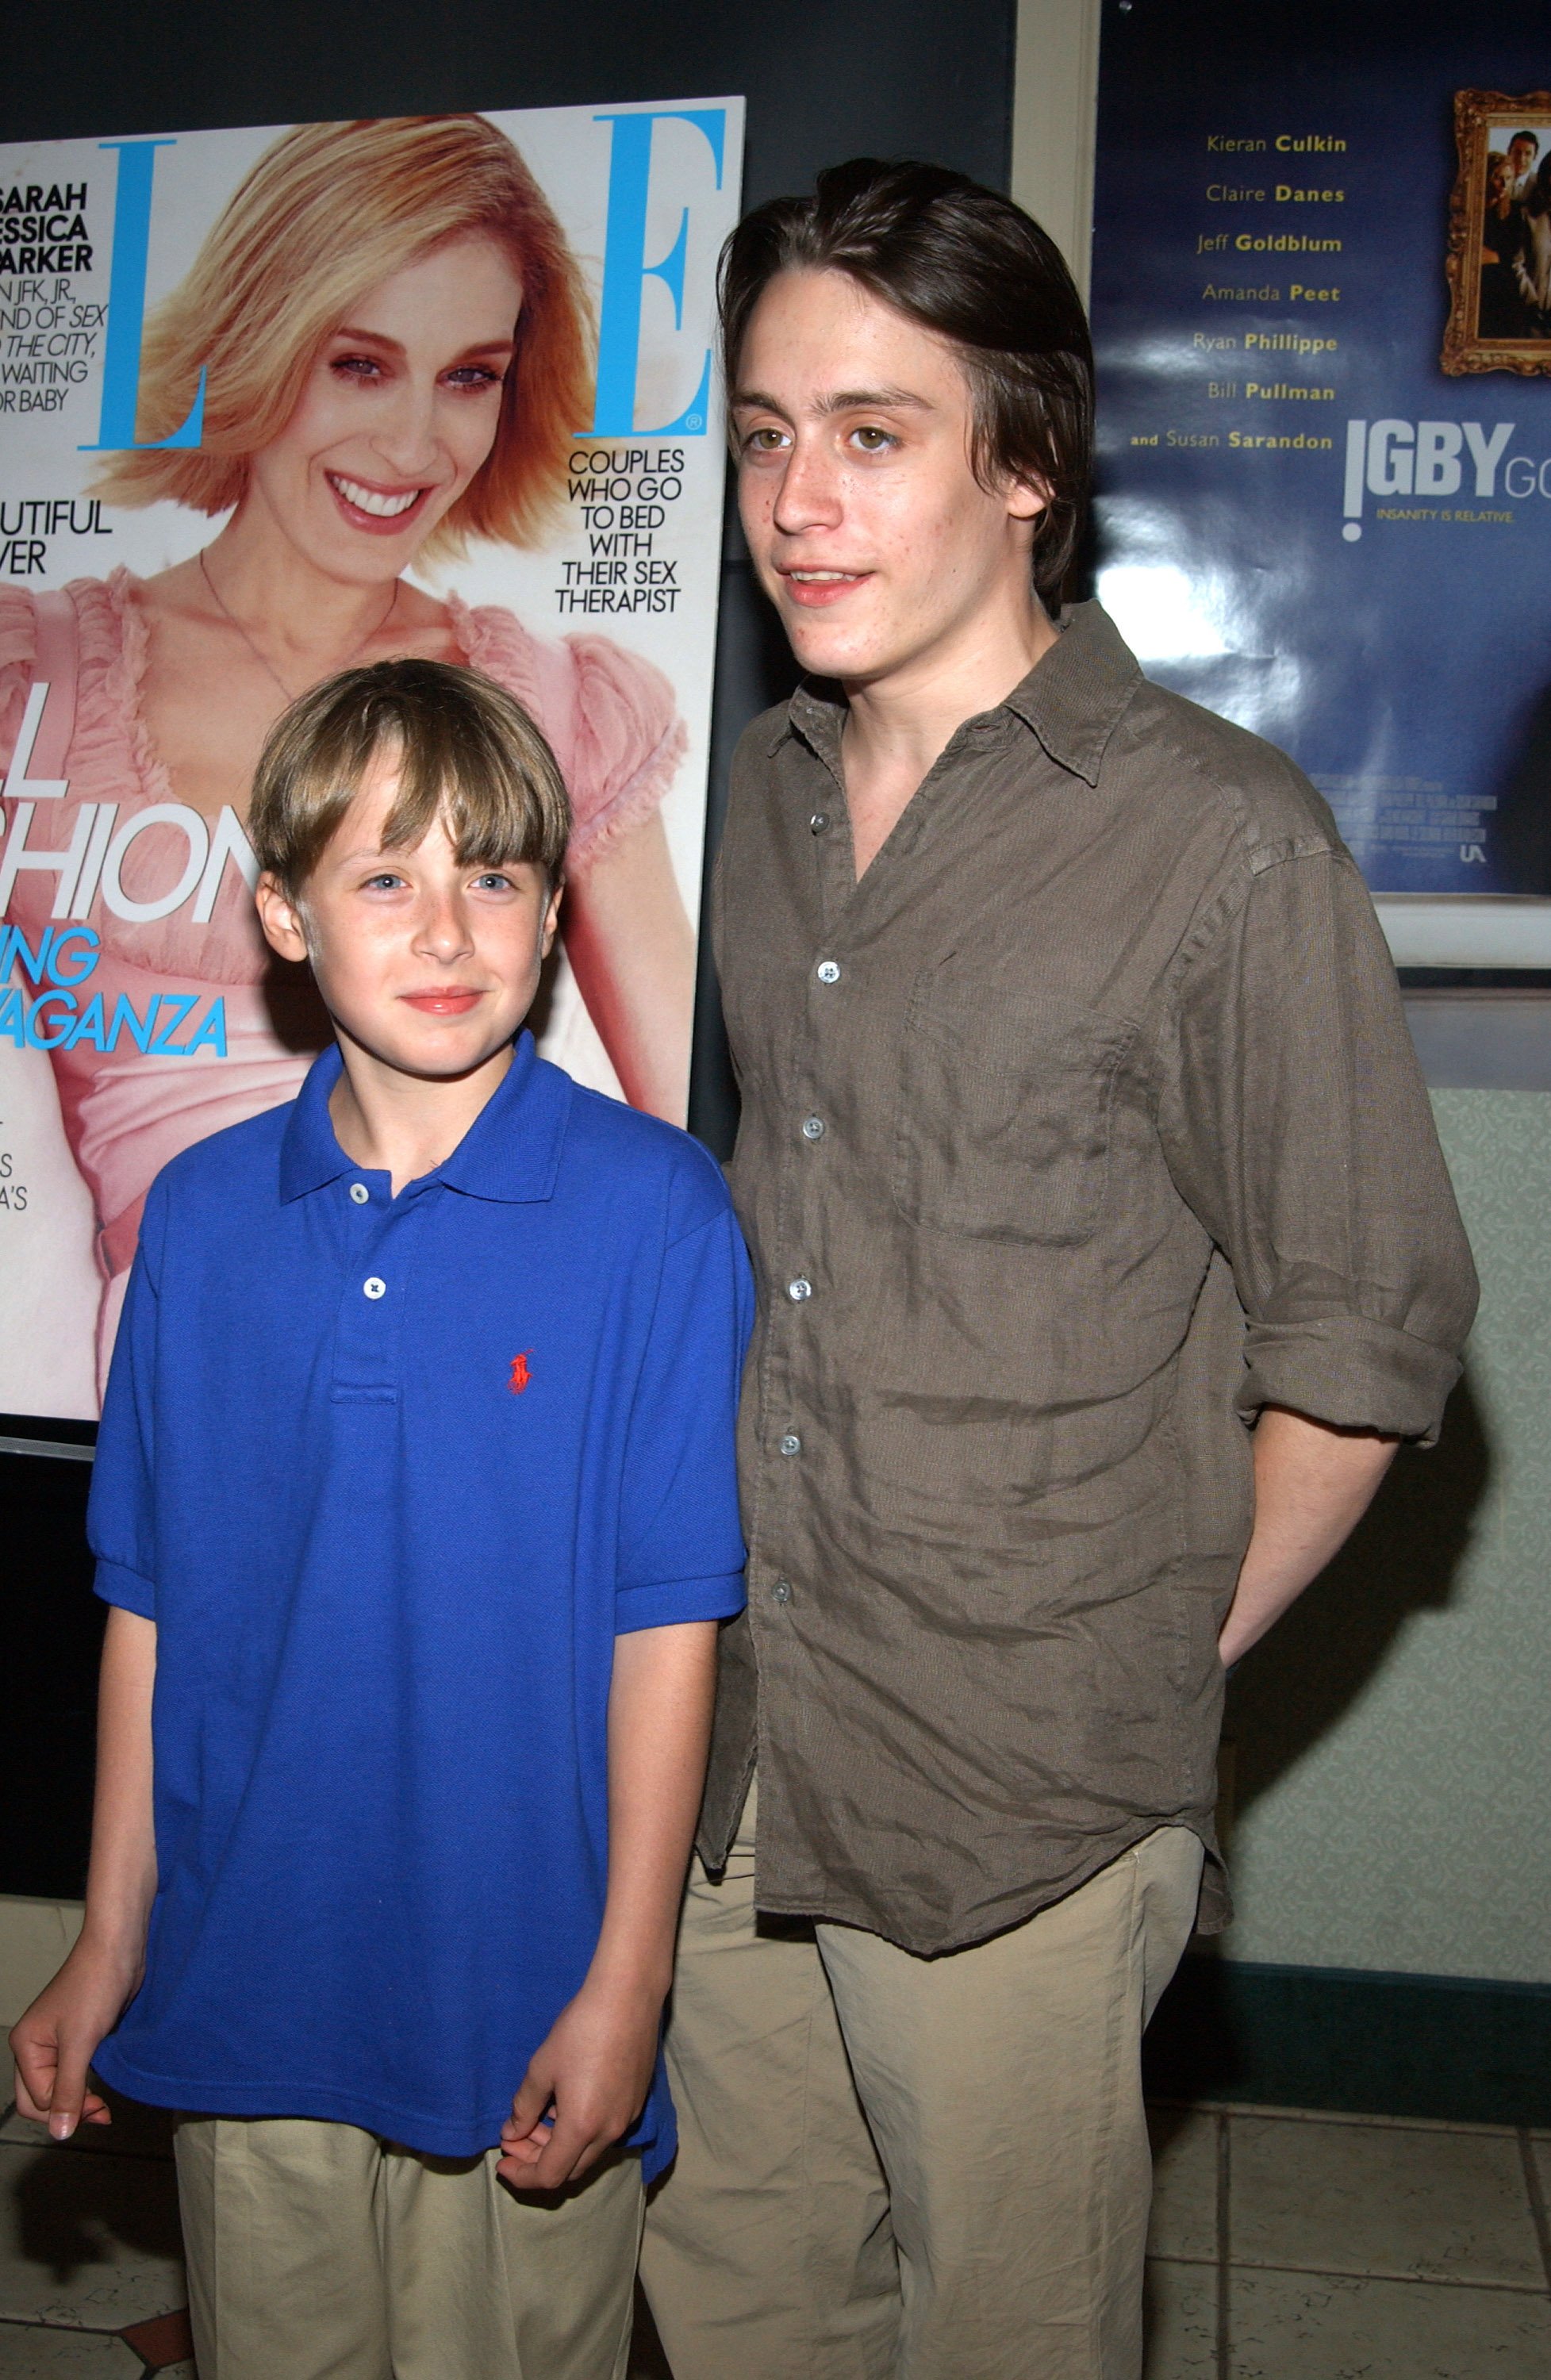 Rory Culkin and Kieran Culkin at "Igby Goes Down" Screening at United Artists Theatre New York, United States. | Source: Getty Images